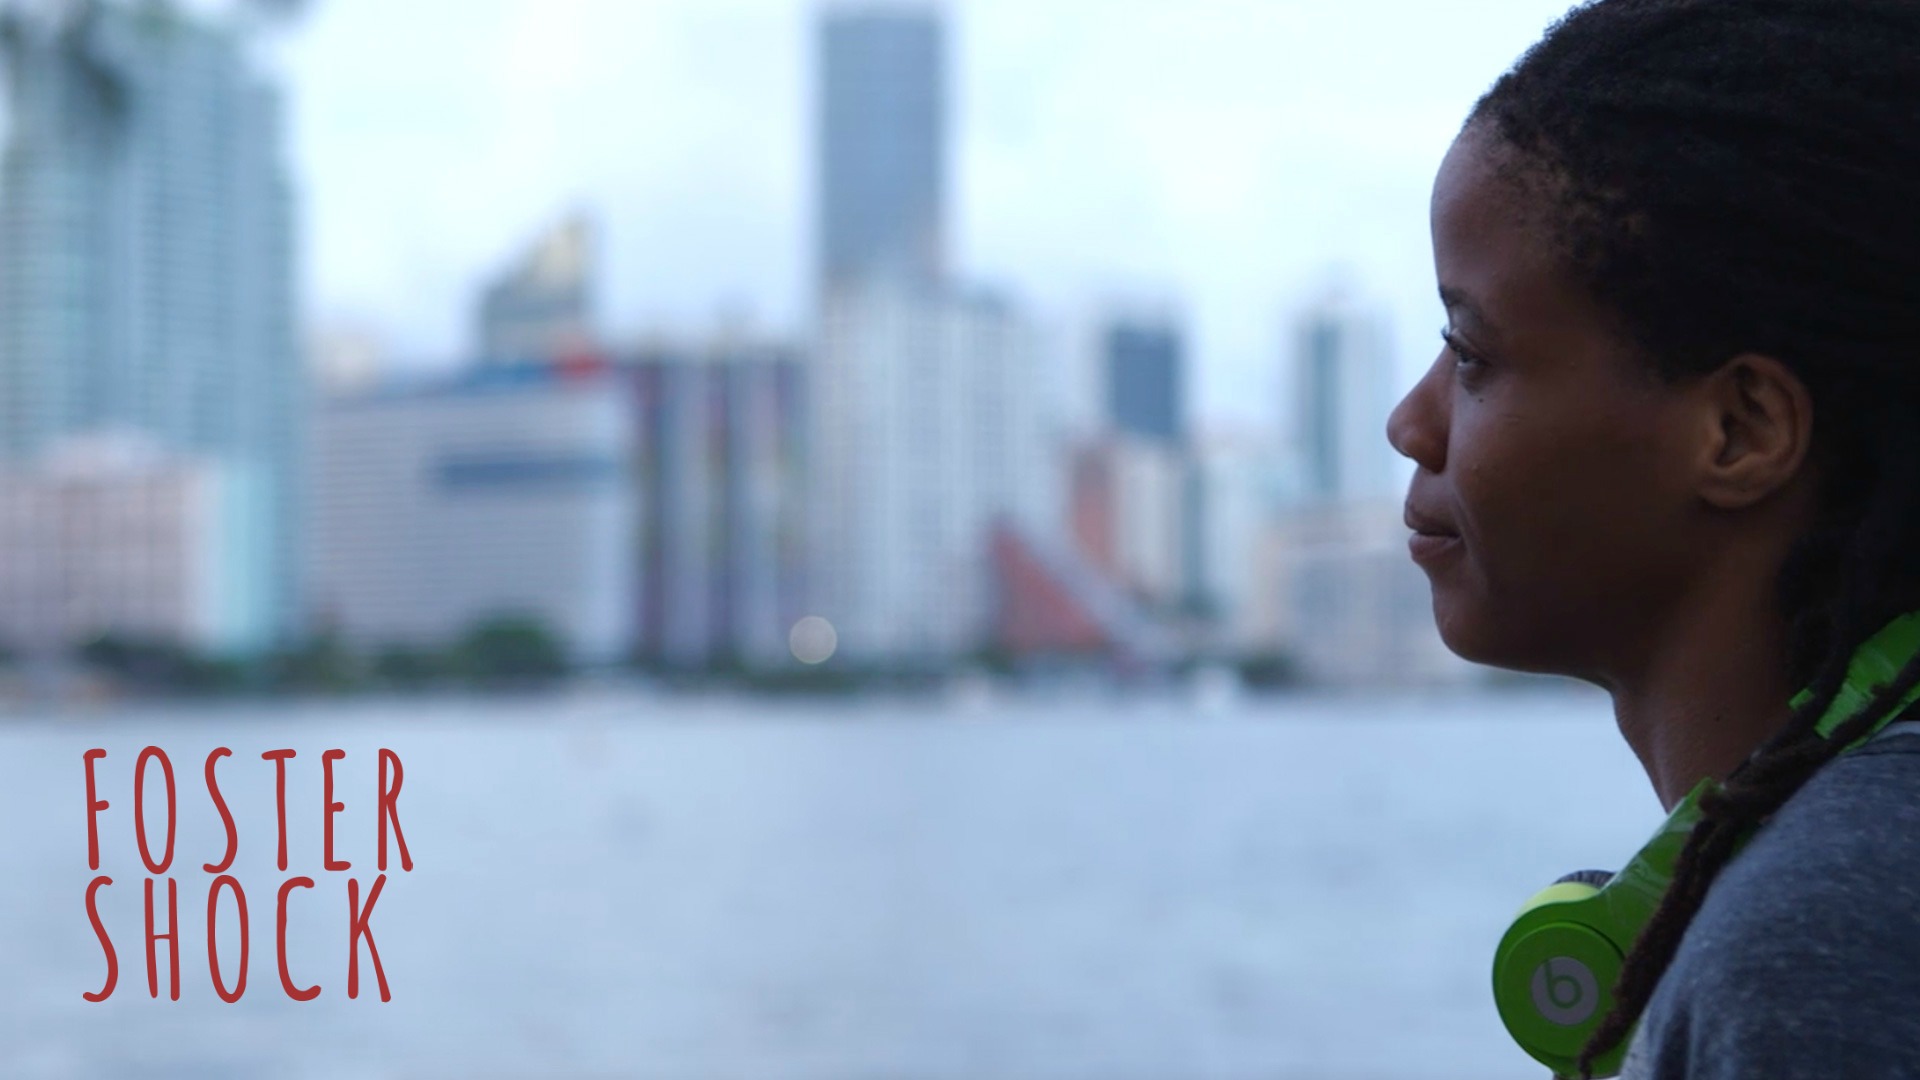 Angel Smith was born and raised in the Miami foster care system. She has been in over fifty homes during her lifetime.